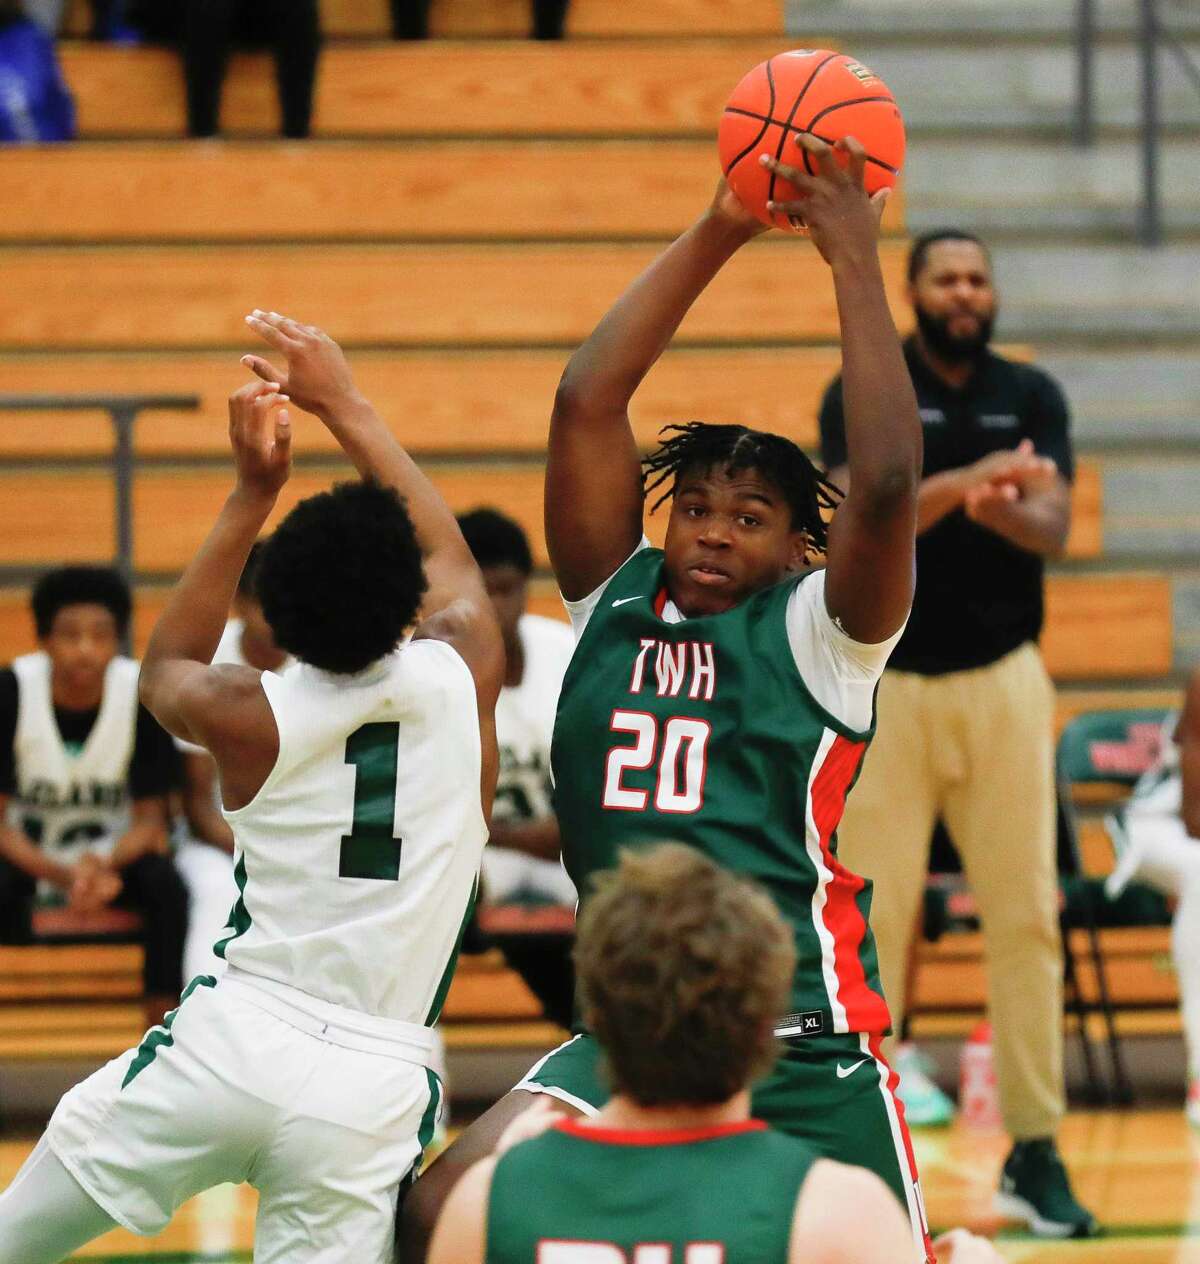 The Woodlands’ David Ifeanyi (20) rebounds during a game at the Rebounders Club Classic at The Woodlands High School, Friday, Nov. 26, 2021, in The Woodlands.